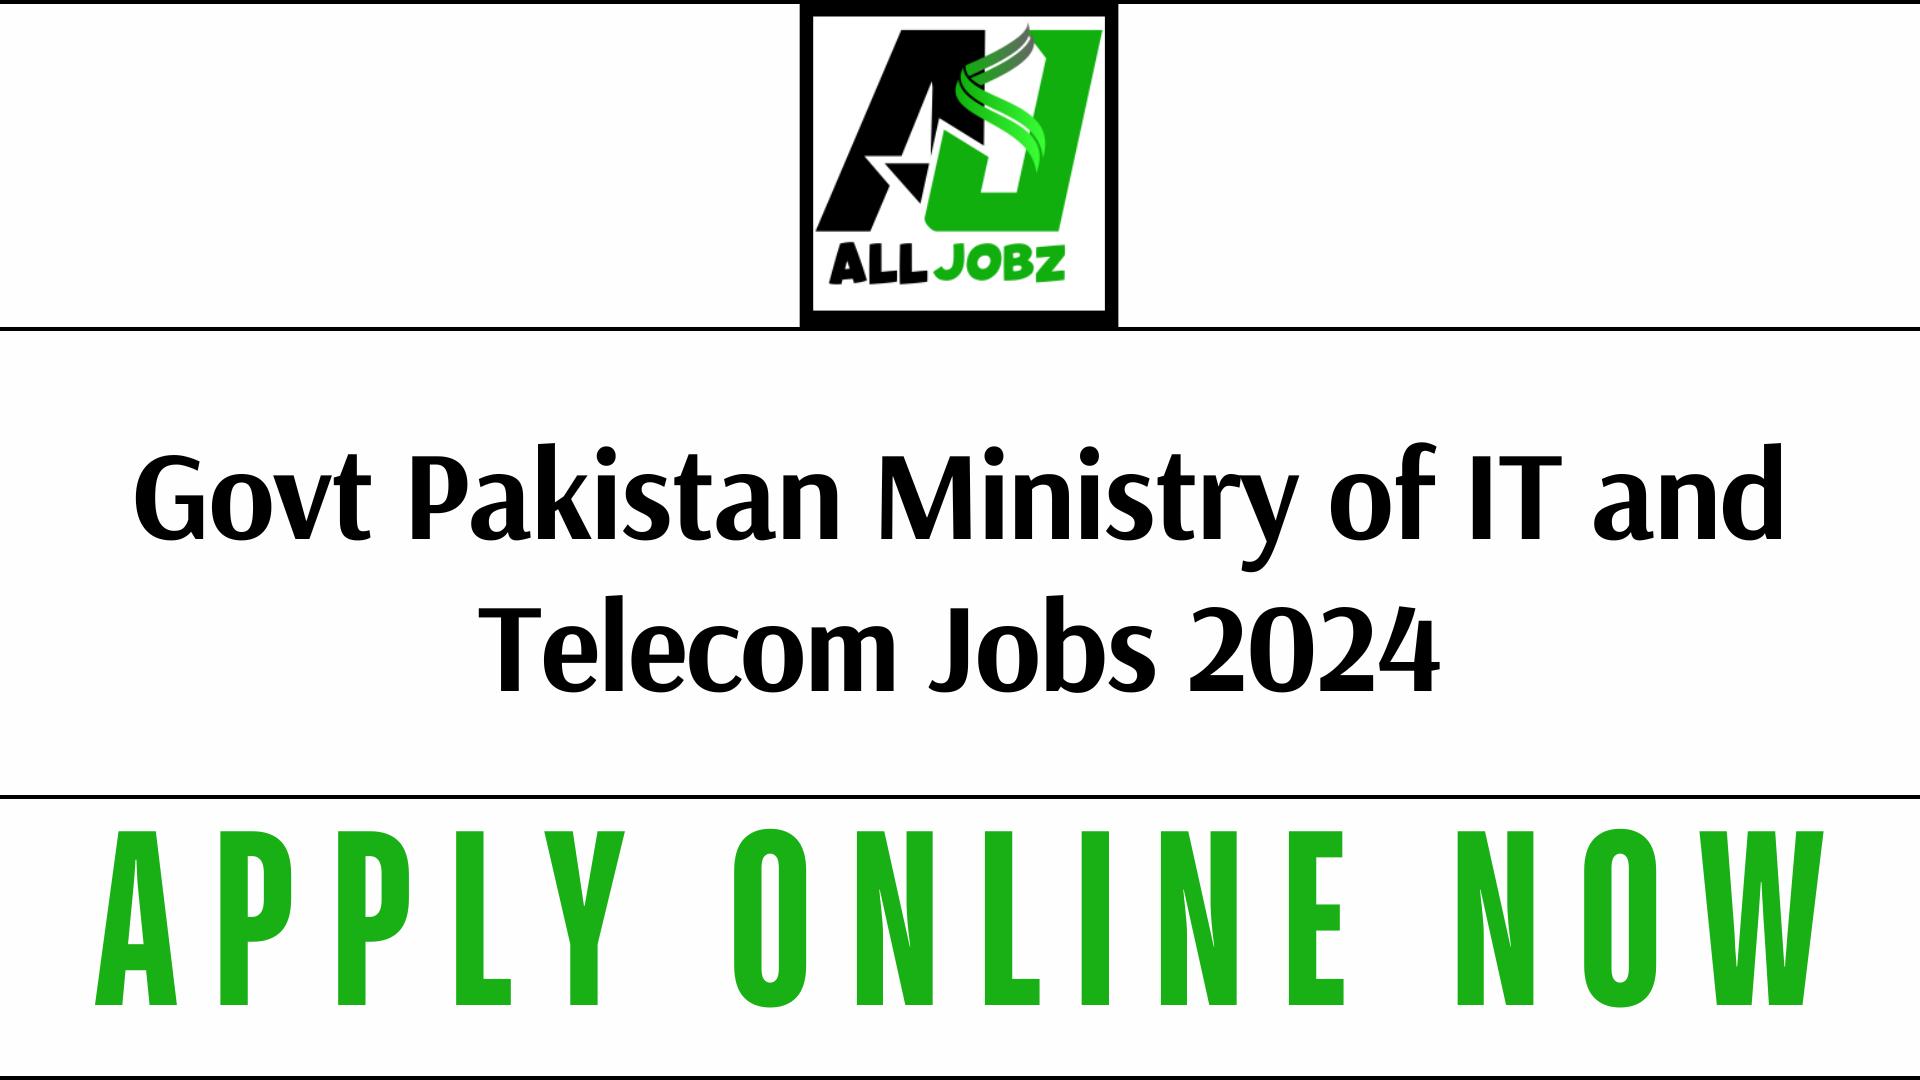 Ministry Of It And Telecom Jobs 2024 For Chief Executive Officer, Ministry Of It And Telecom Jobs 2024 Karachi, Ministry Of It And Telecom Jobs 2024 Last Date, Ministry Of It And Telecom Jobs 2024 Application Form, Ministry Of It And Telecom Jobs 2024 For Female, Ministry Of It And Telecom Jobs 2024 Apply Online, Ministry Of Information Technology And Telecom